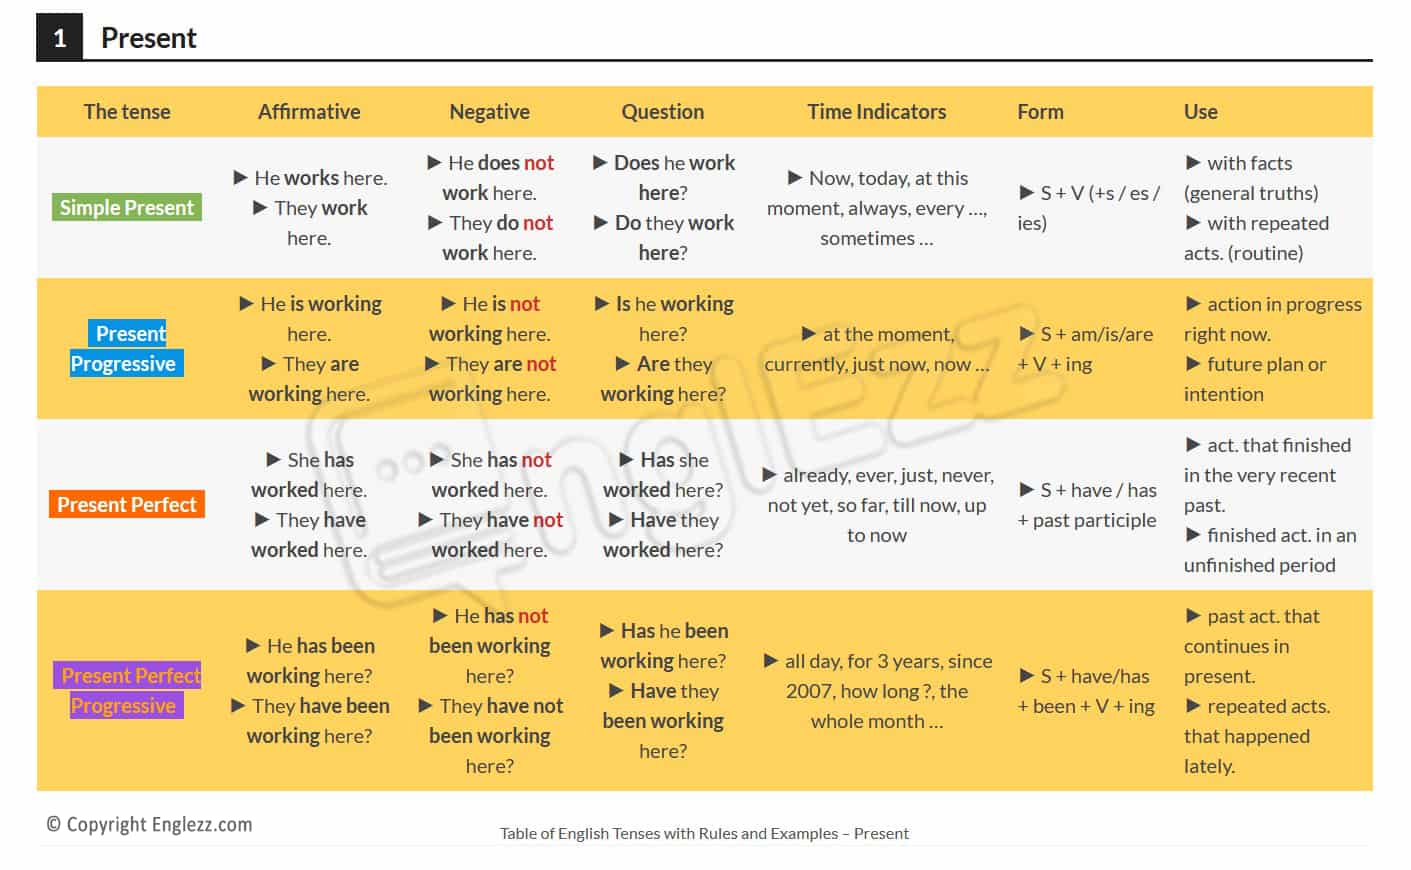 table-of-english-tenses-with-rules-and-examples-englezz